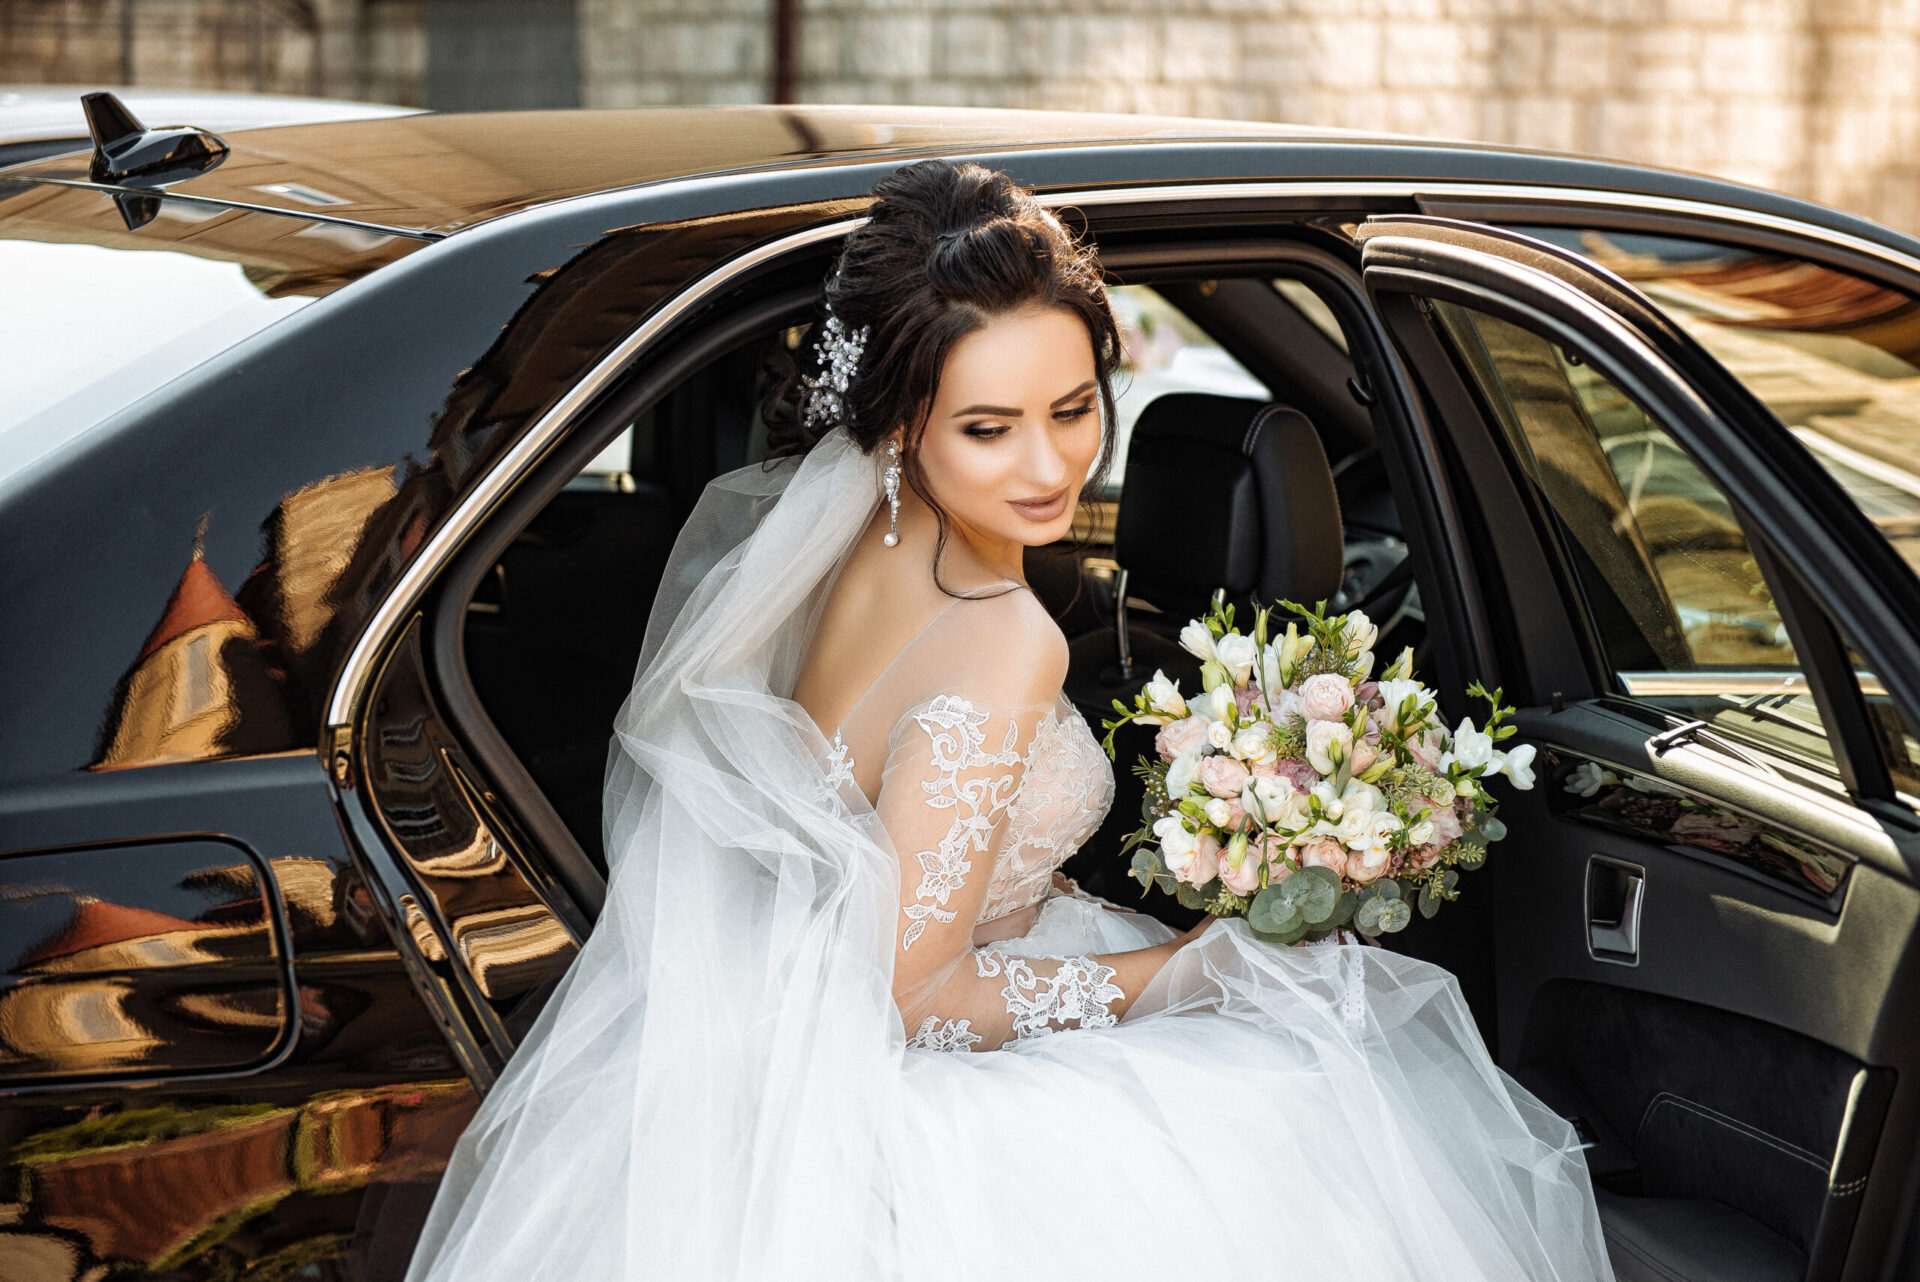 Dark-haired,Bride,Jewelry,Head,Sits,In,A,Black,Car,On